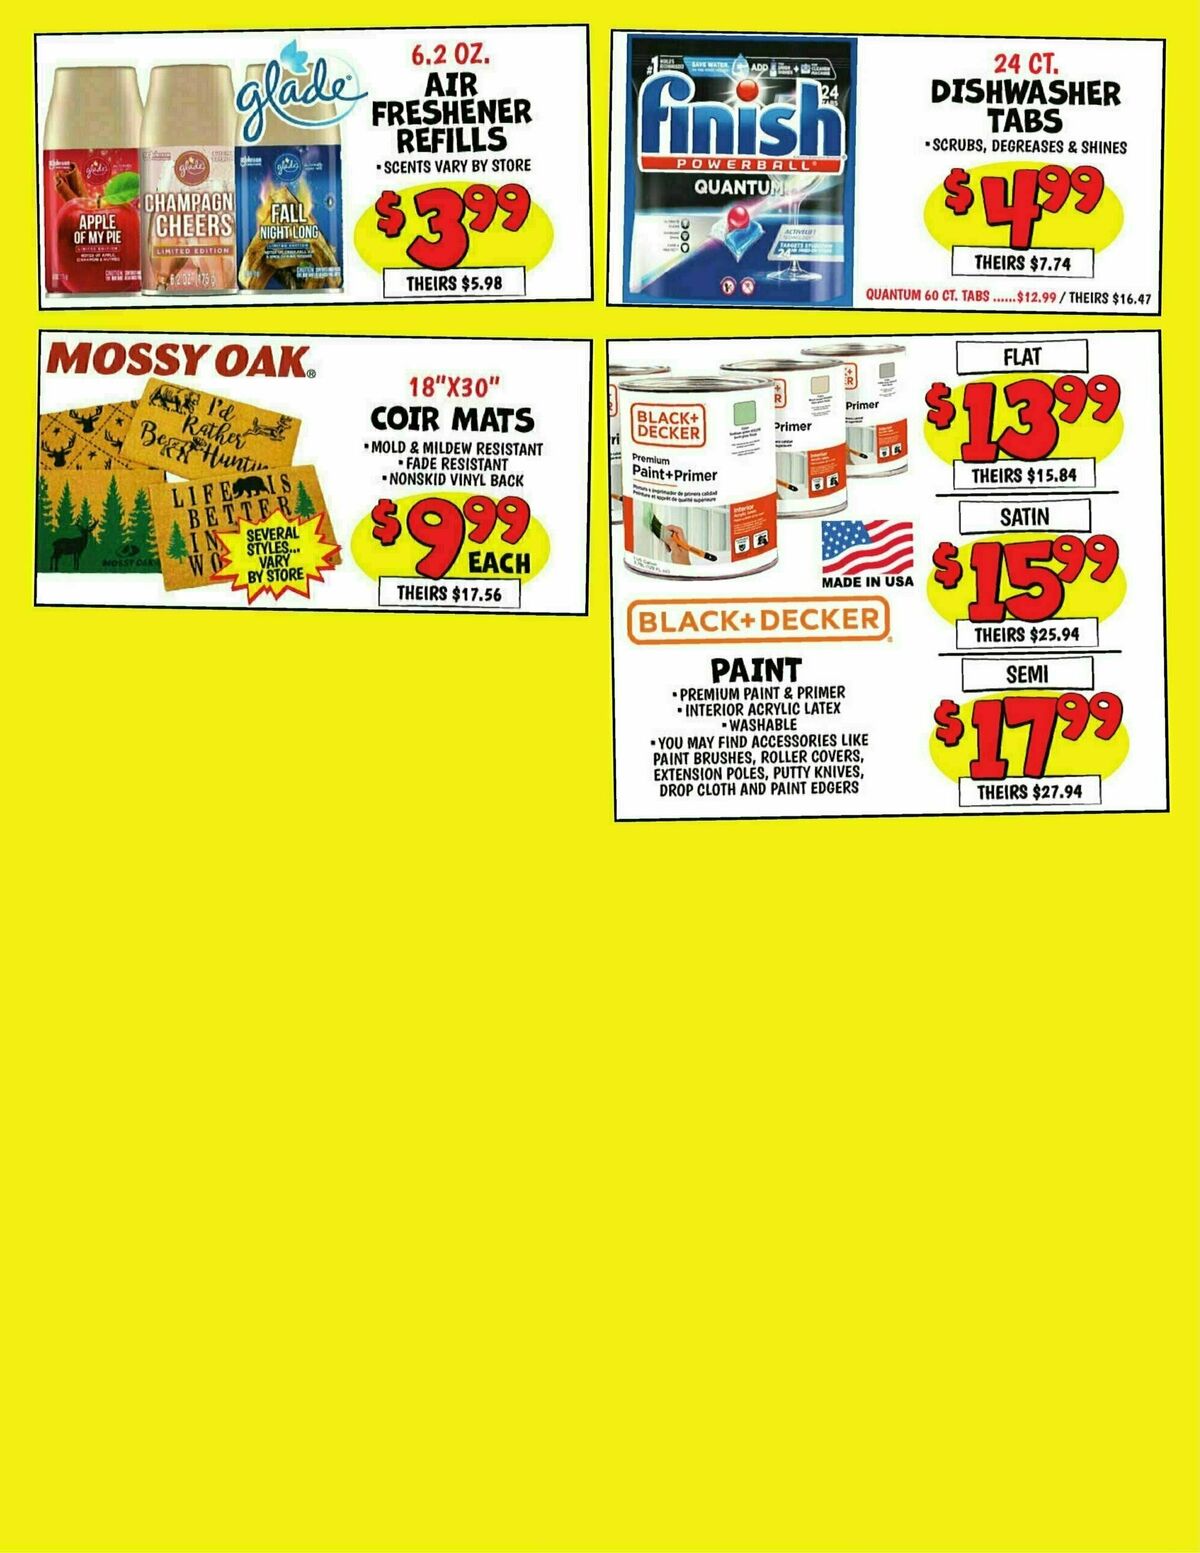 Ollie's Bargain Outlet Weekly Ad from October 13